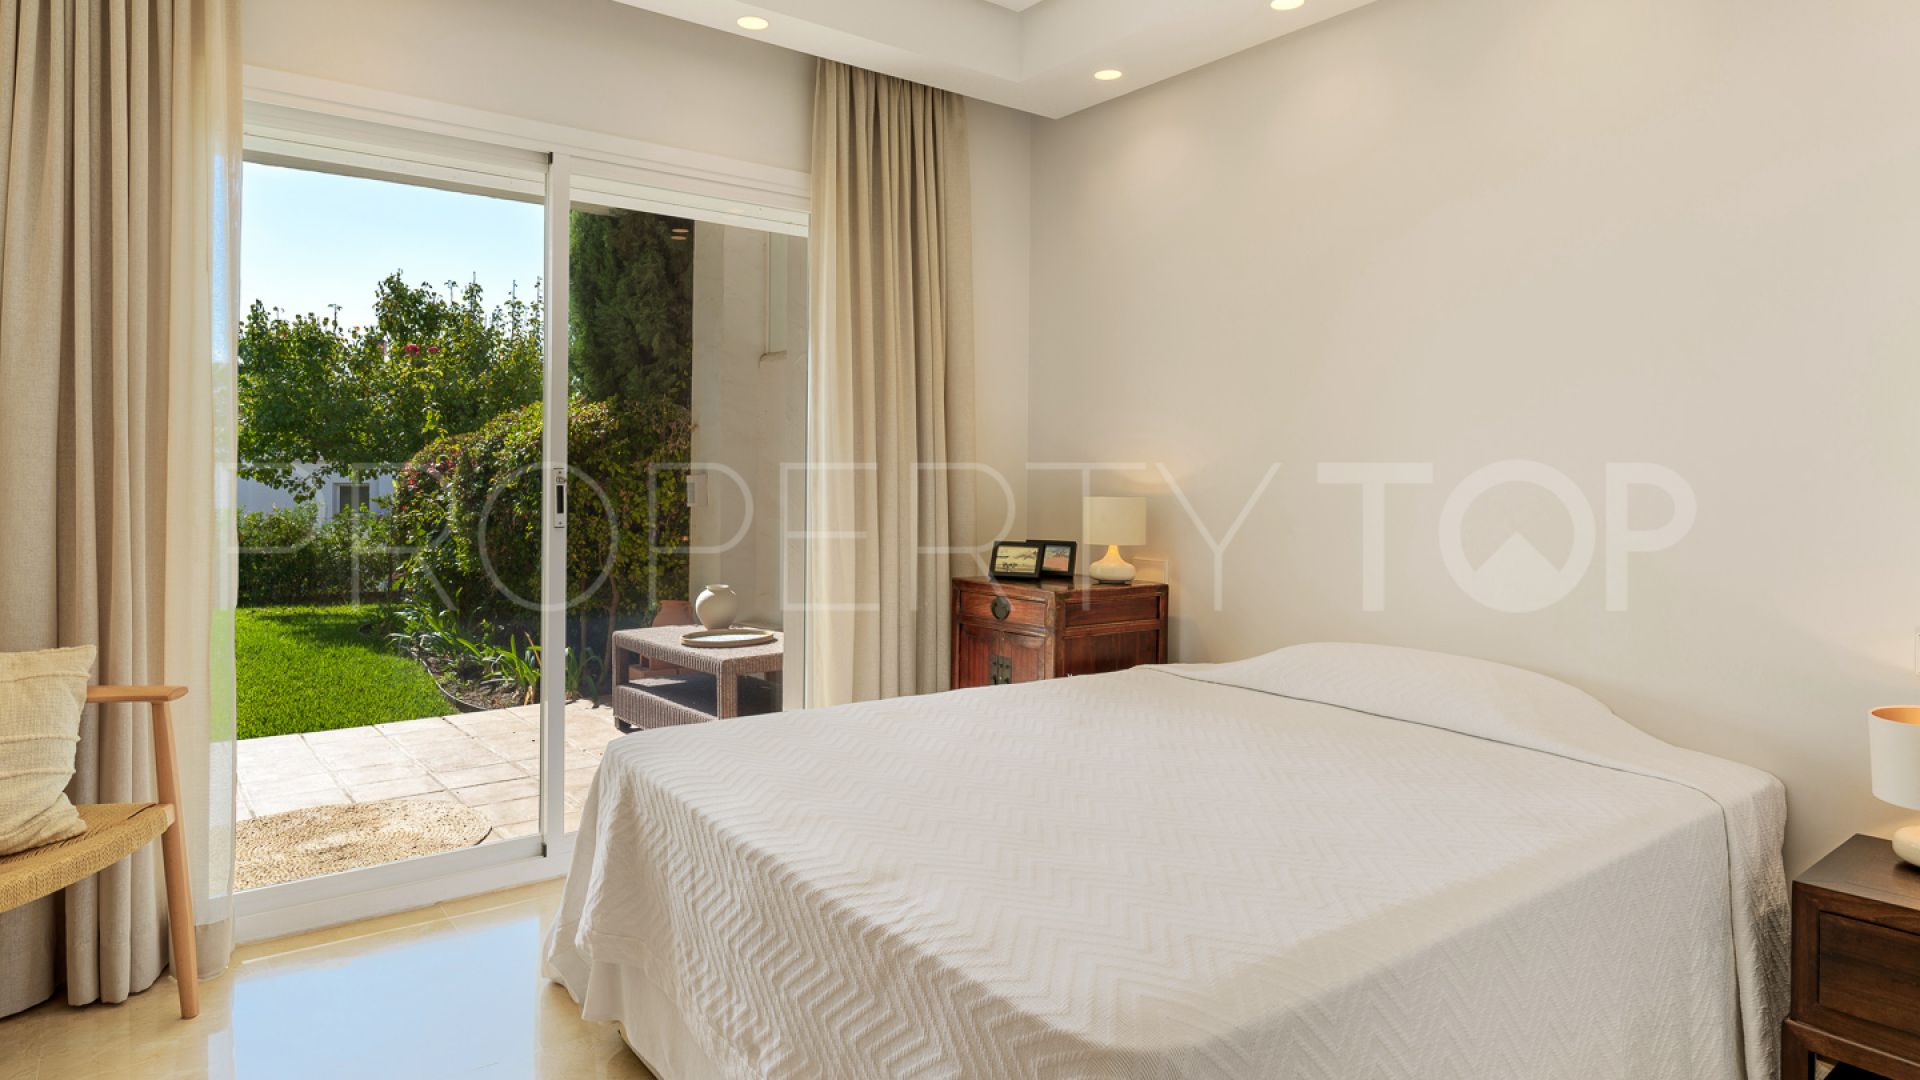 2 bedrooms Toses apartment for sale